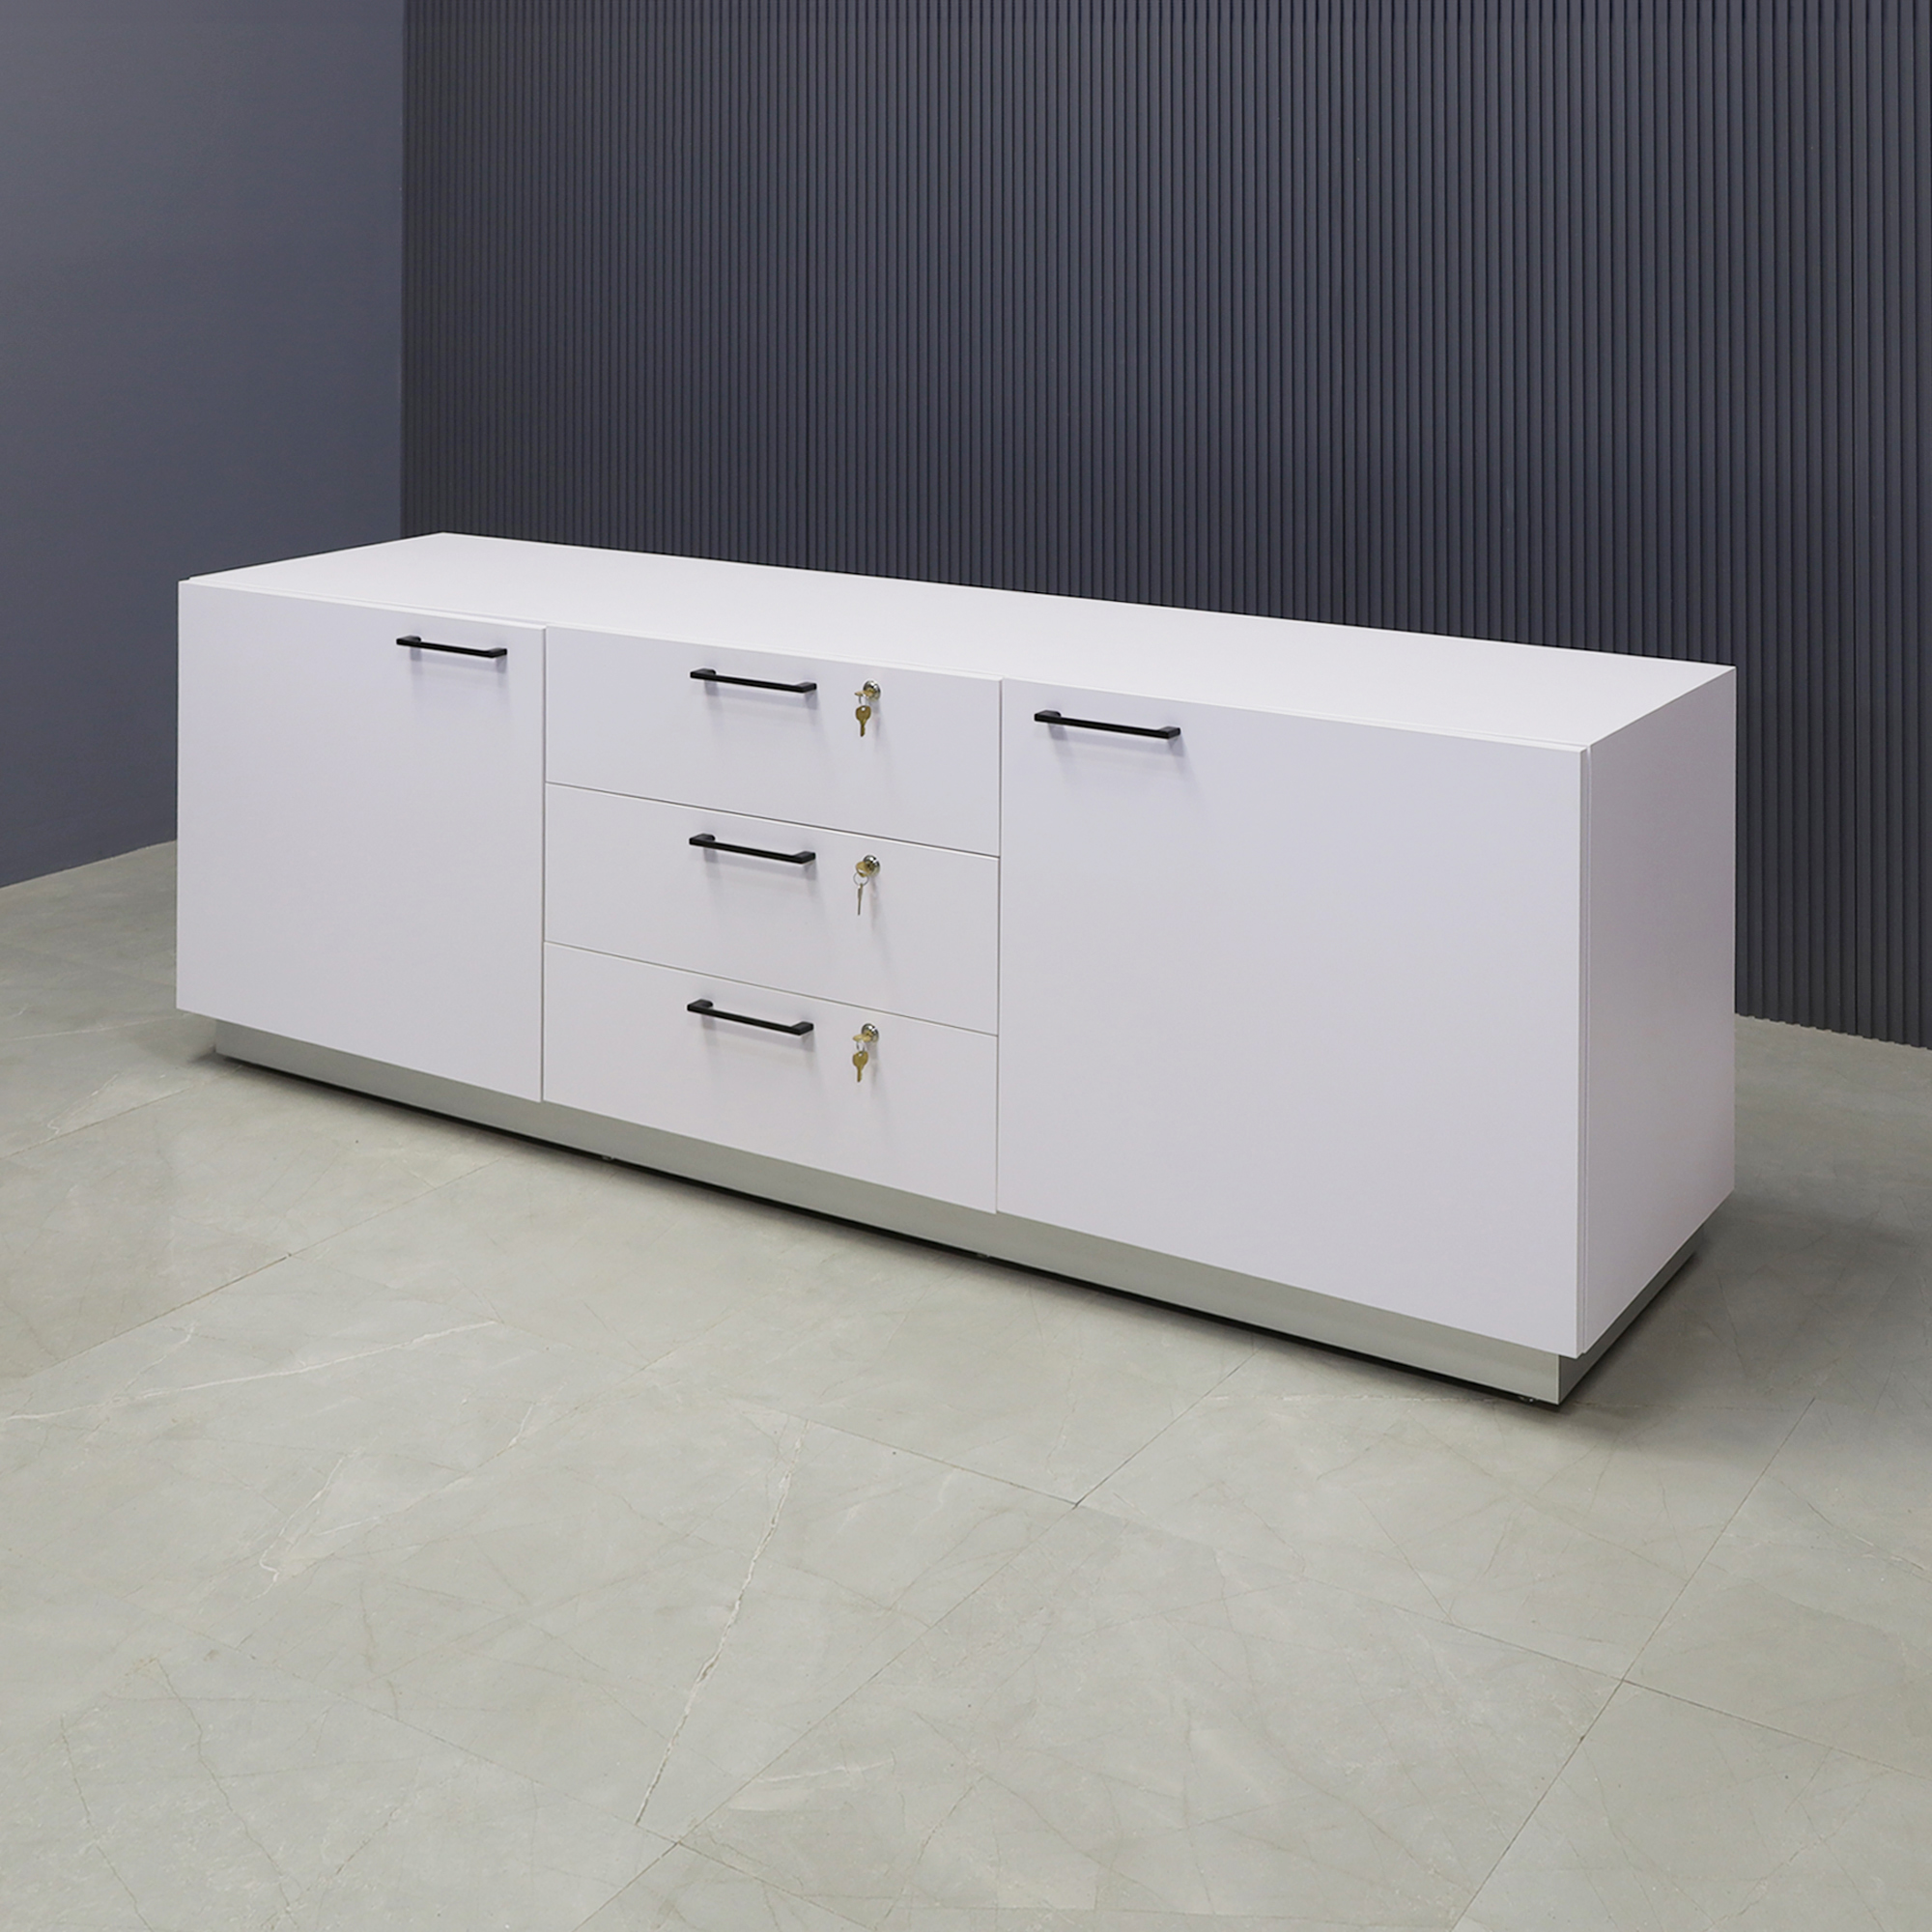 90-inch Manhattan Storage Credenza in white matte laminate credenza, front drawers & doors, with 3 locks, and brushed aluminum toe-kick, shown here.